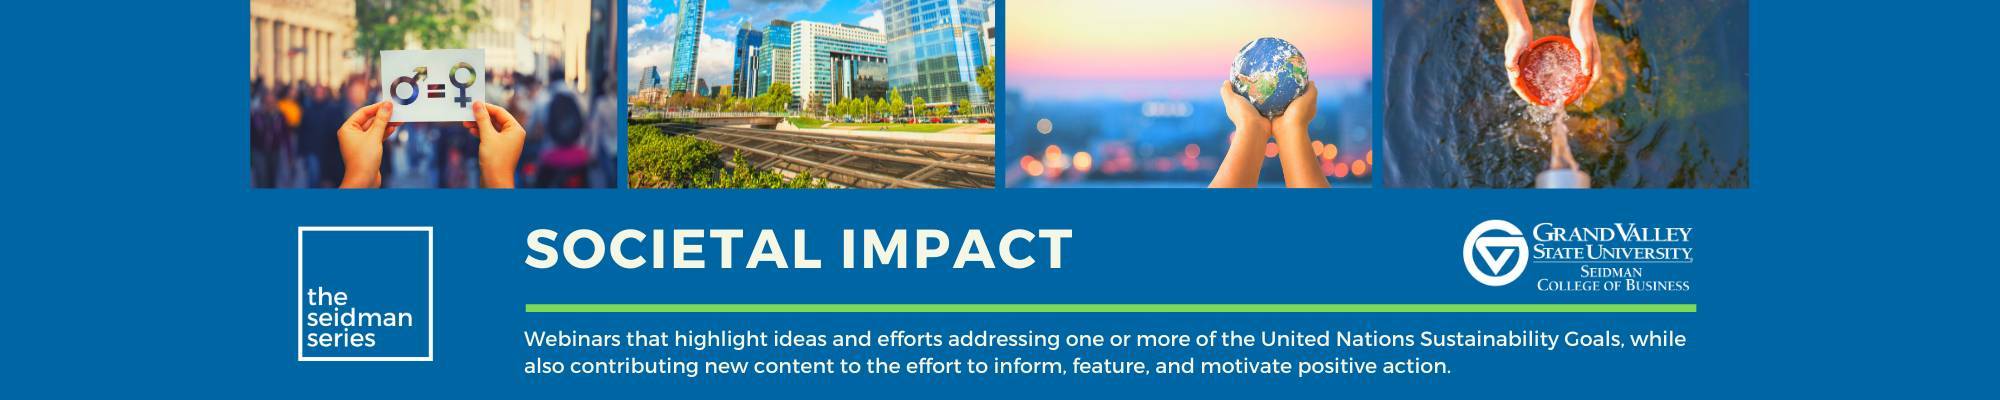 The Seidman series - Societal impact. Webinars that highlight ideas and efforts addressing one or more of the United nations Sustainability Goals, while also contributing new content to the effort to inform, feature, and motivate positive action.